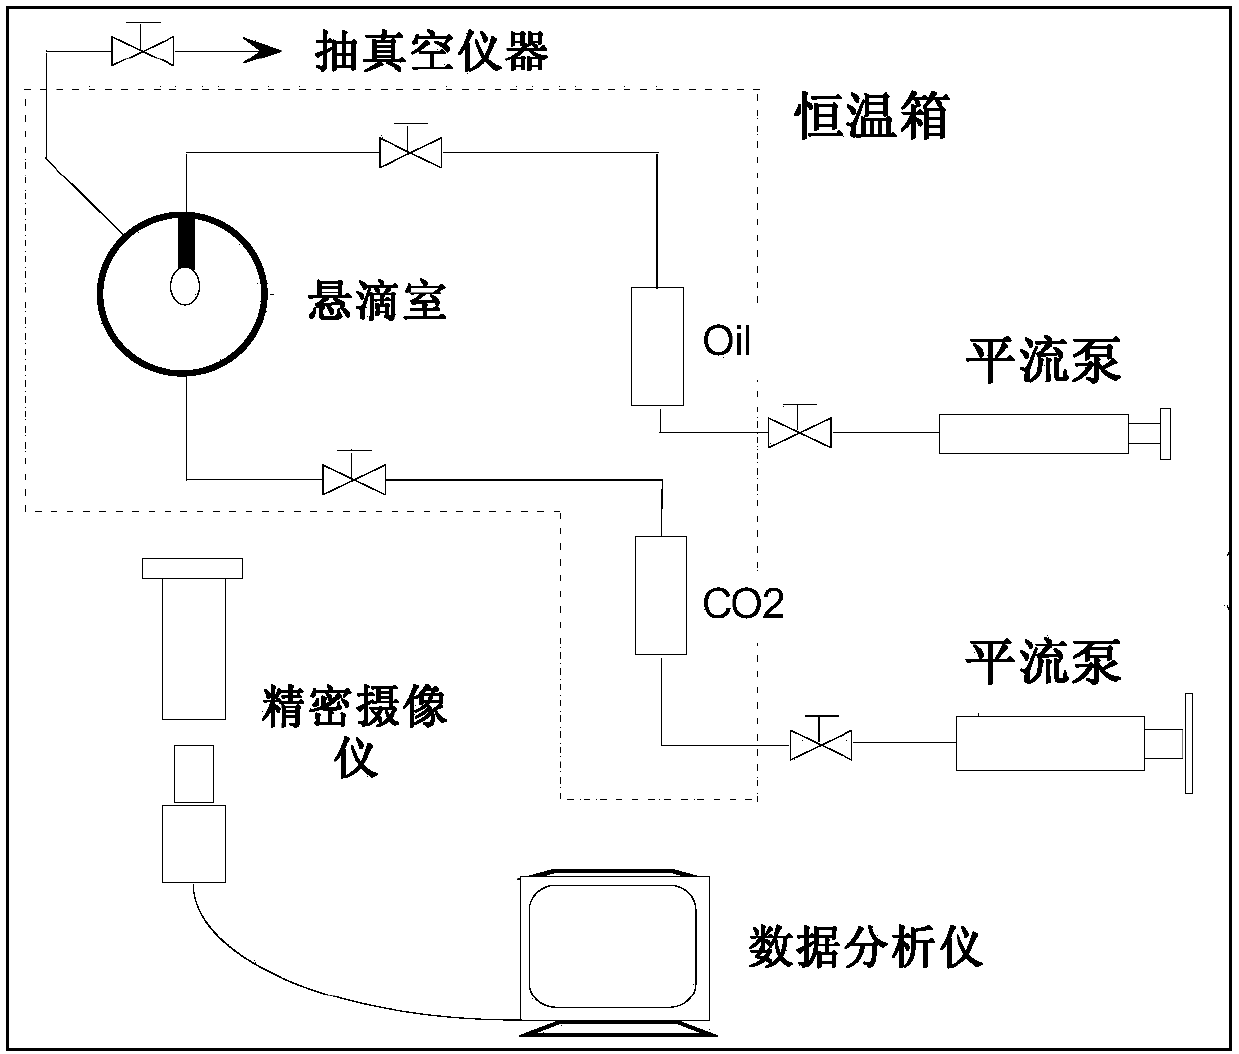 A Method for Determining the Dynamic Miscible Pressure in Simulating CO2 Flooding